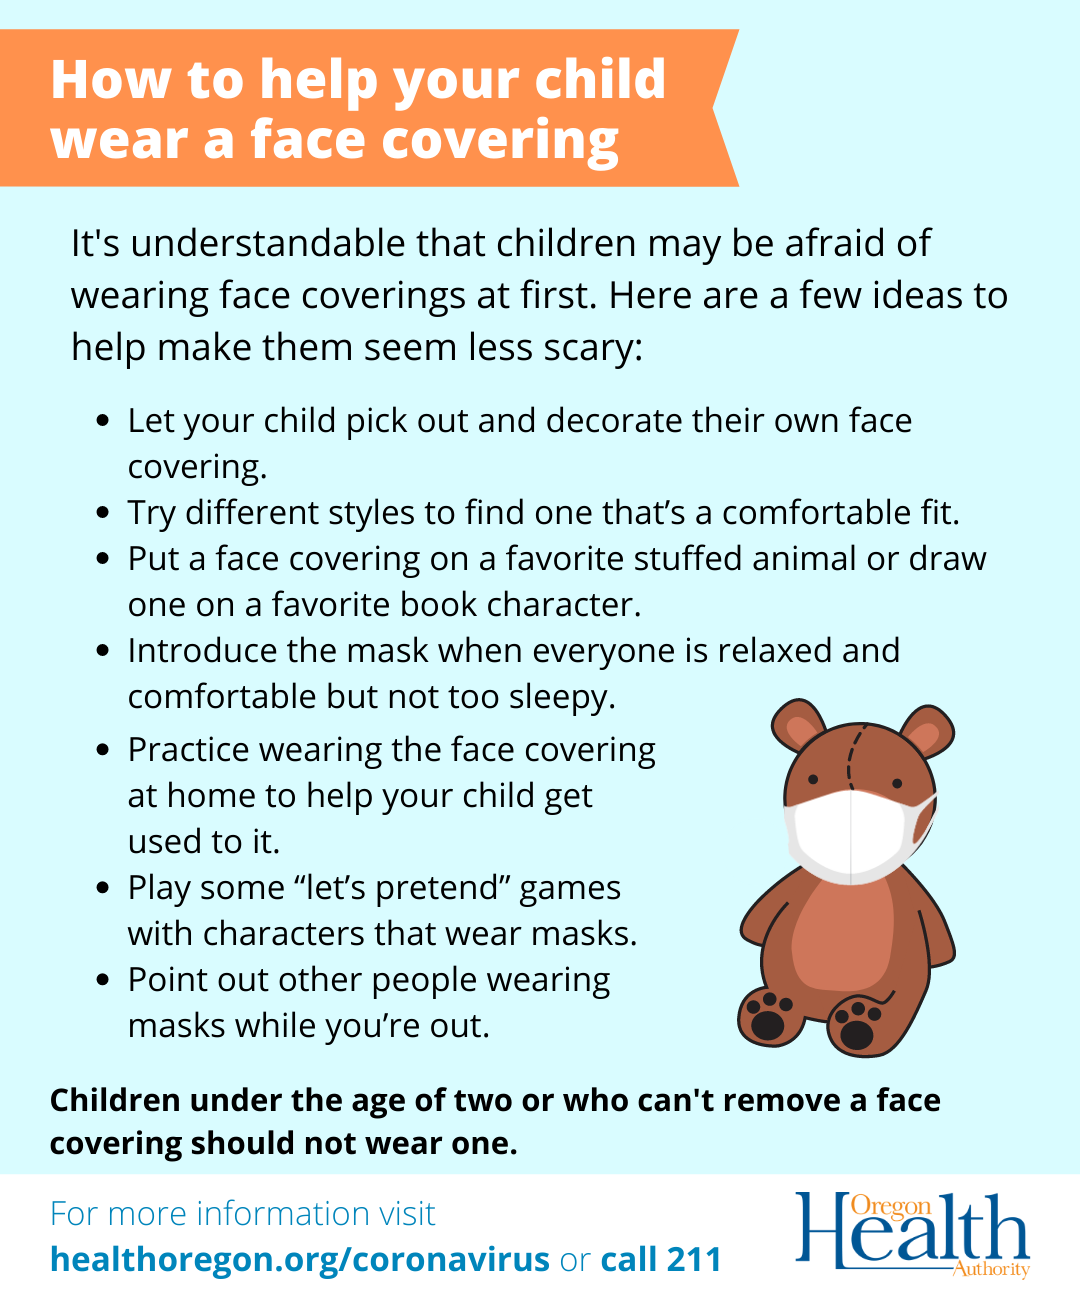 How to help your child wear a face covering